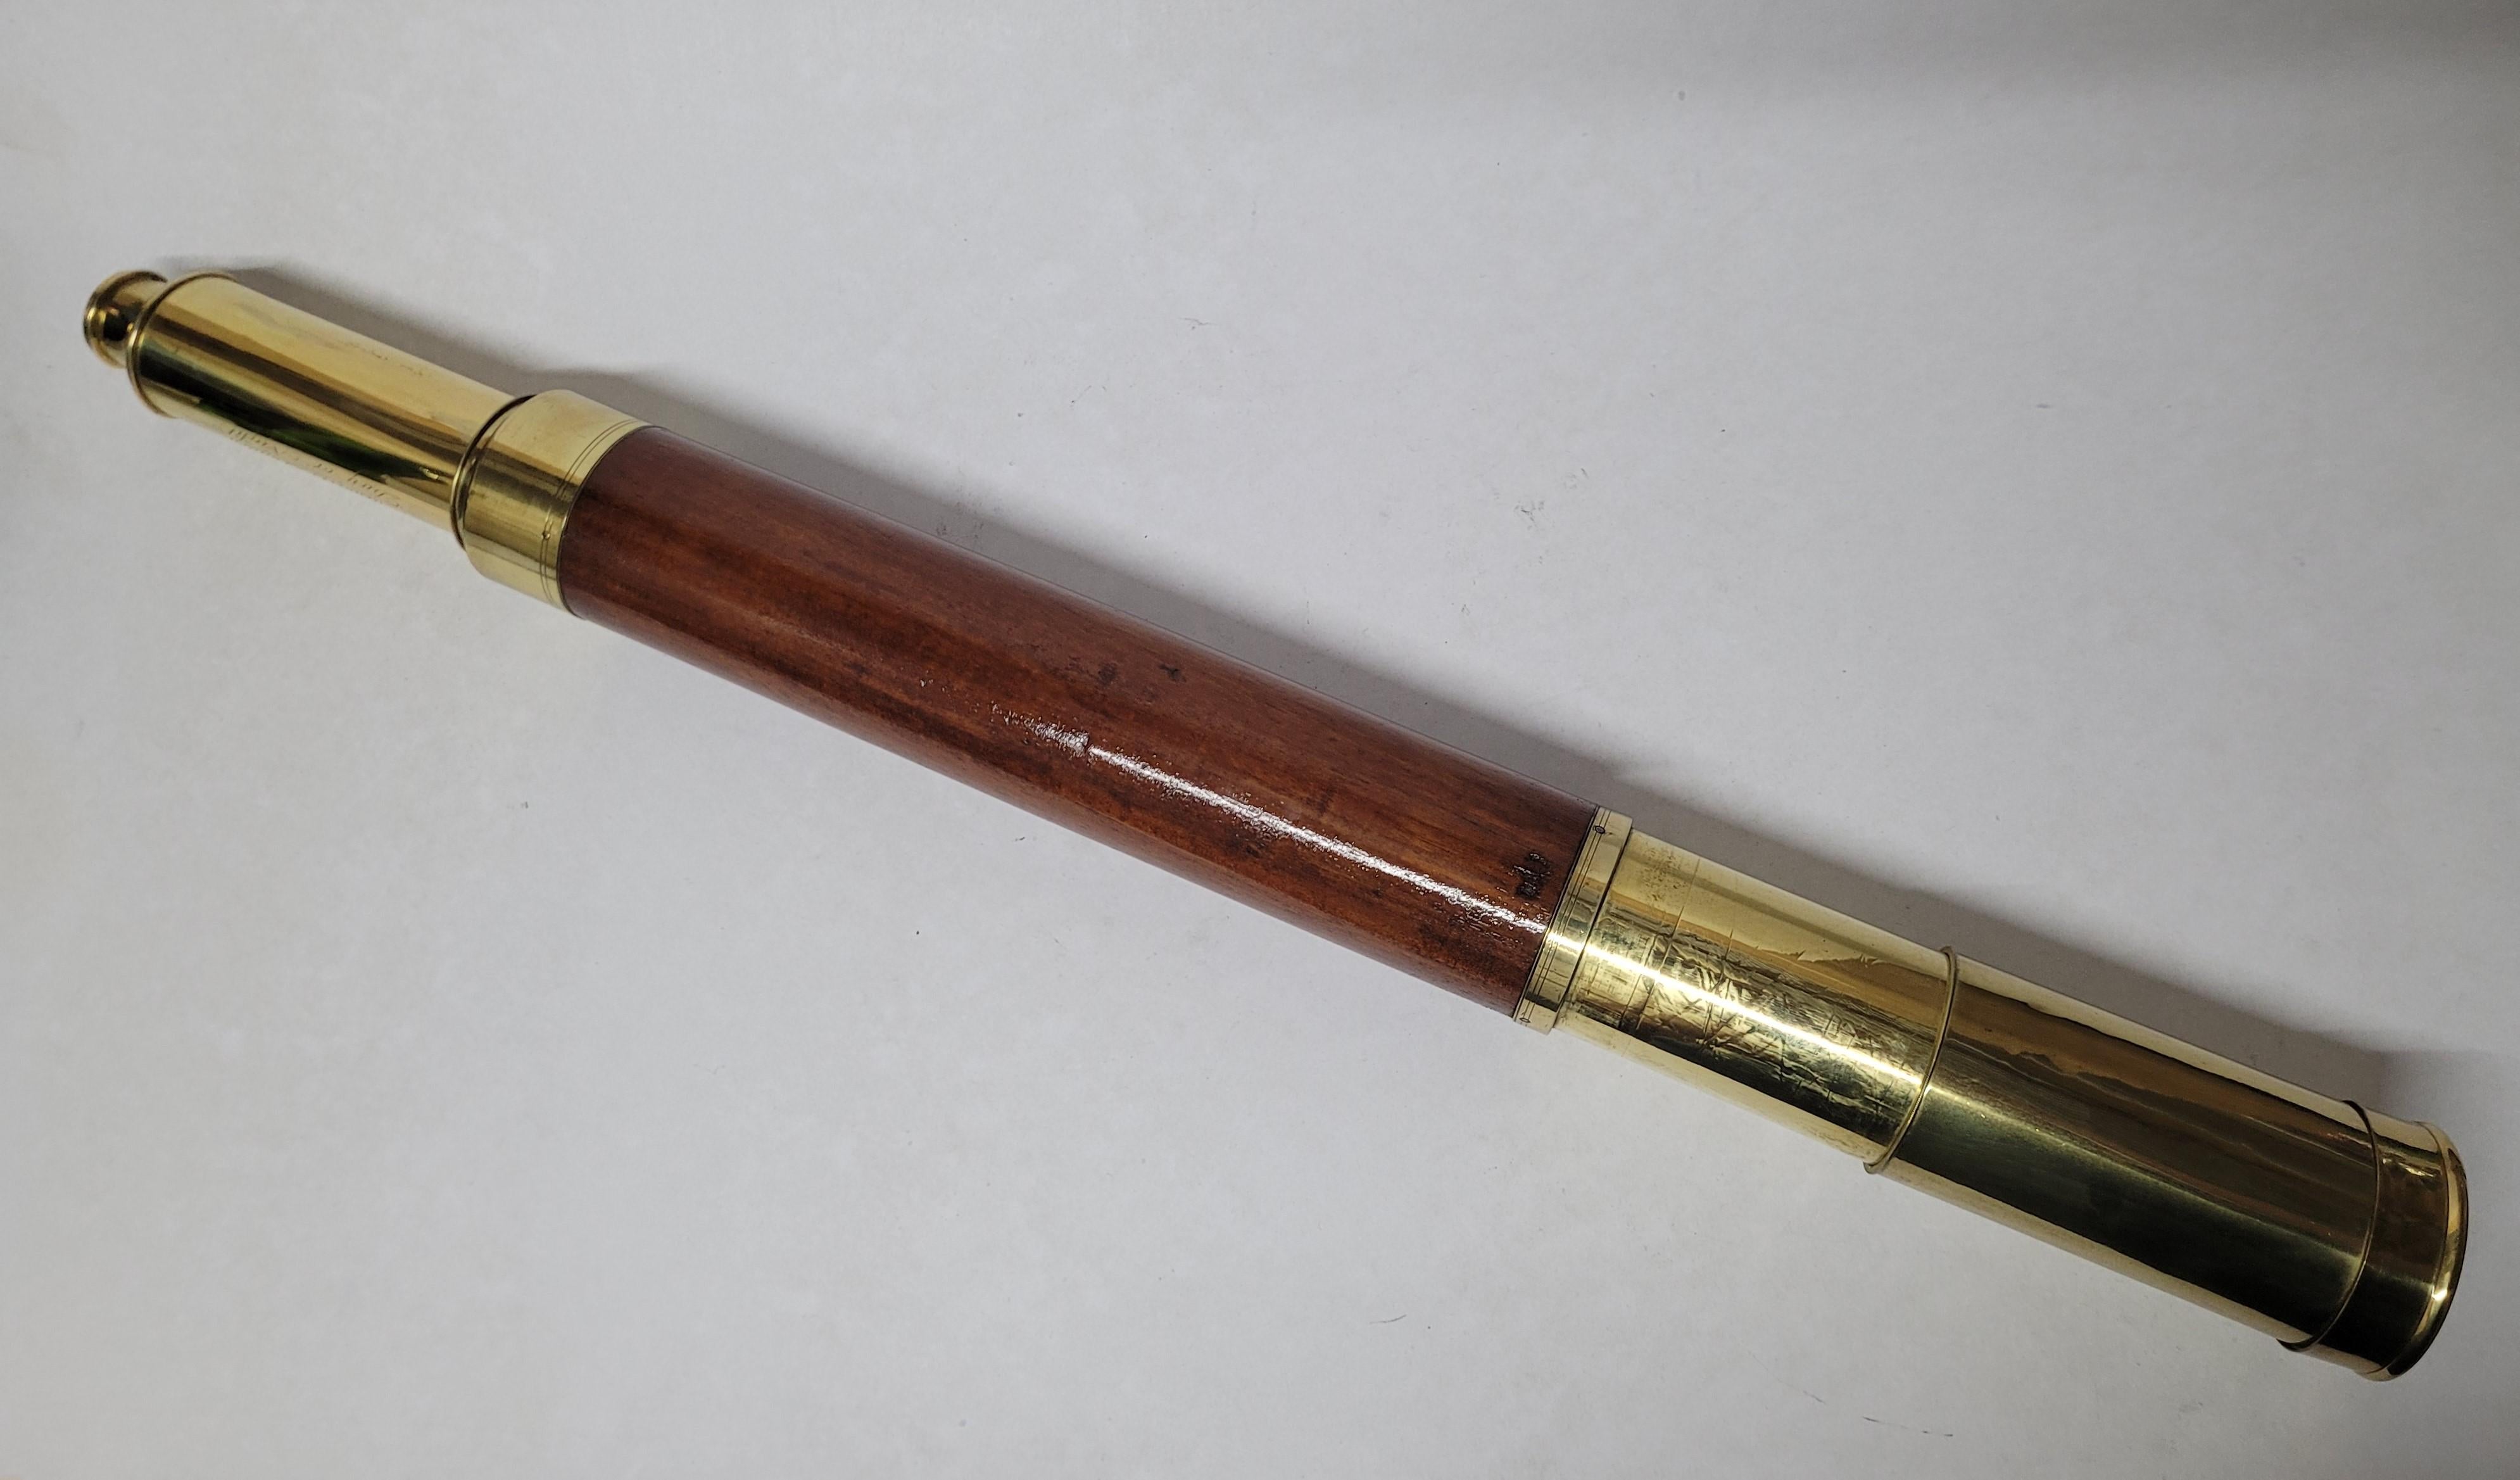 Ships spyglass telescope appropriate for use on a yacht, ship, or anywhere with a view. This has been meticulously polished and lacquered. We just restored a great collection of these. This fine instrument has a single draw varnished wood barrel of